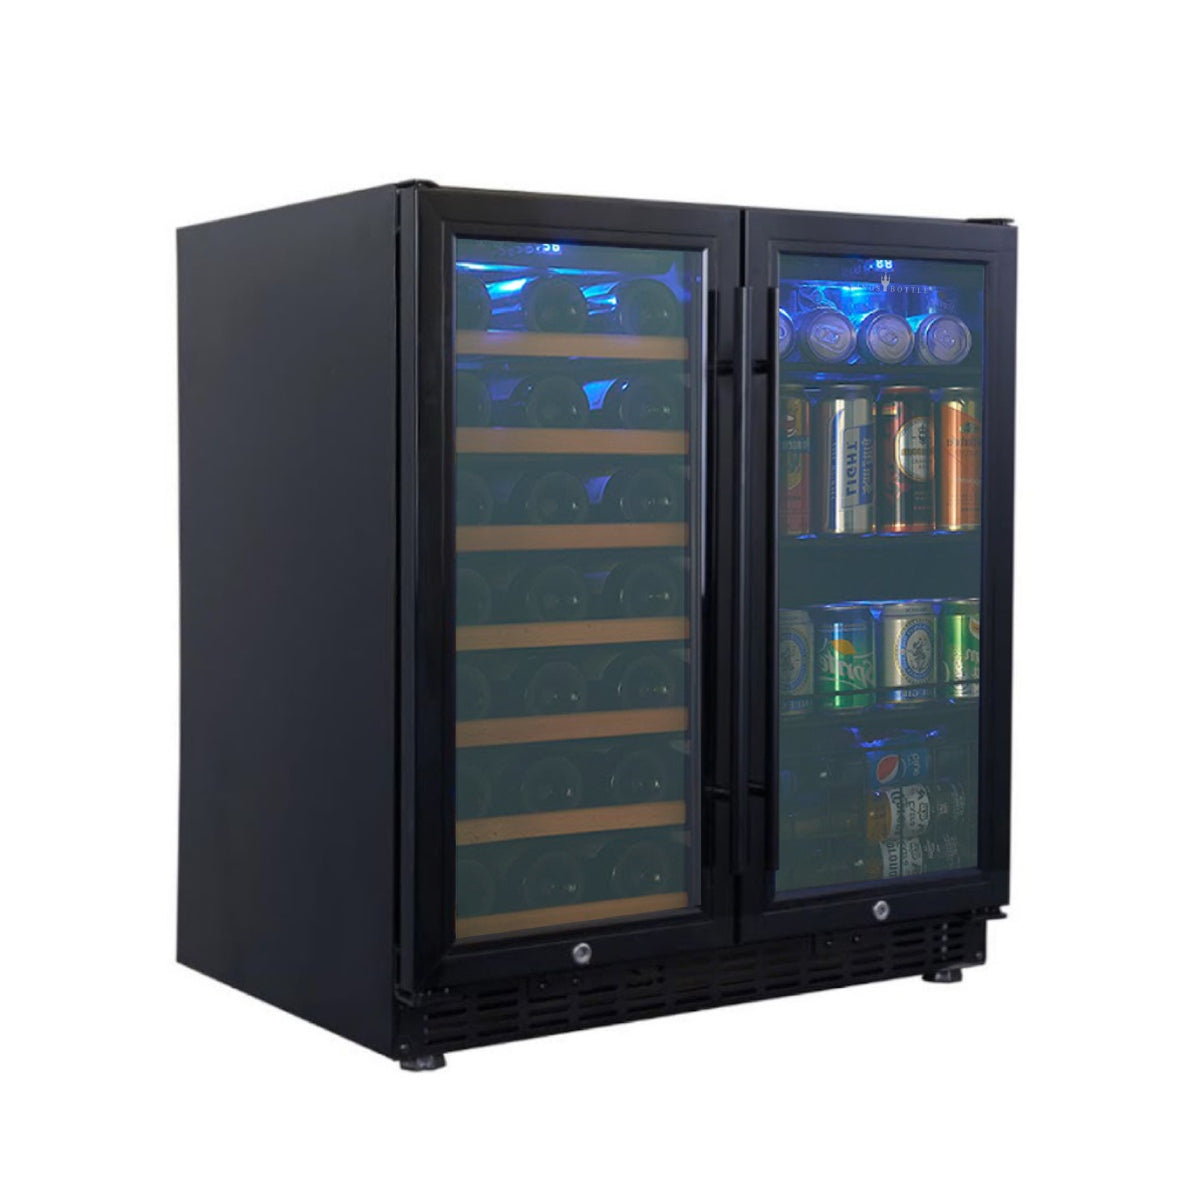 A black refrigerator with a glass door, featuring two compartments for wine and beer storage.